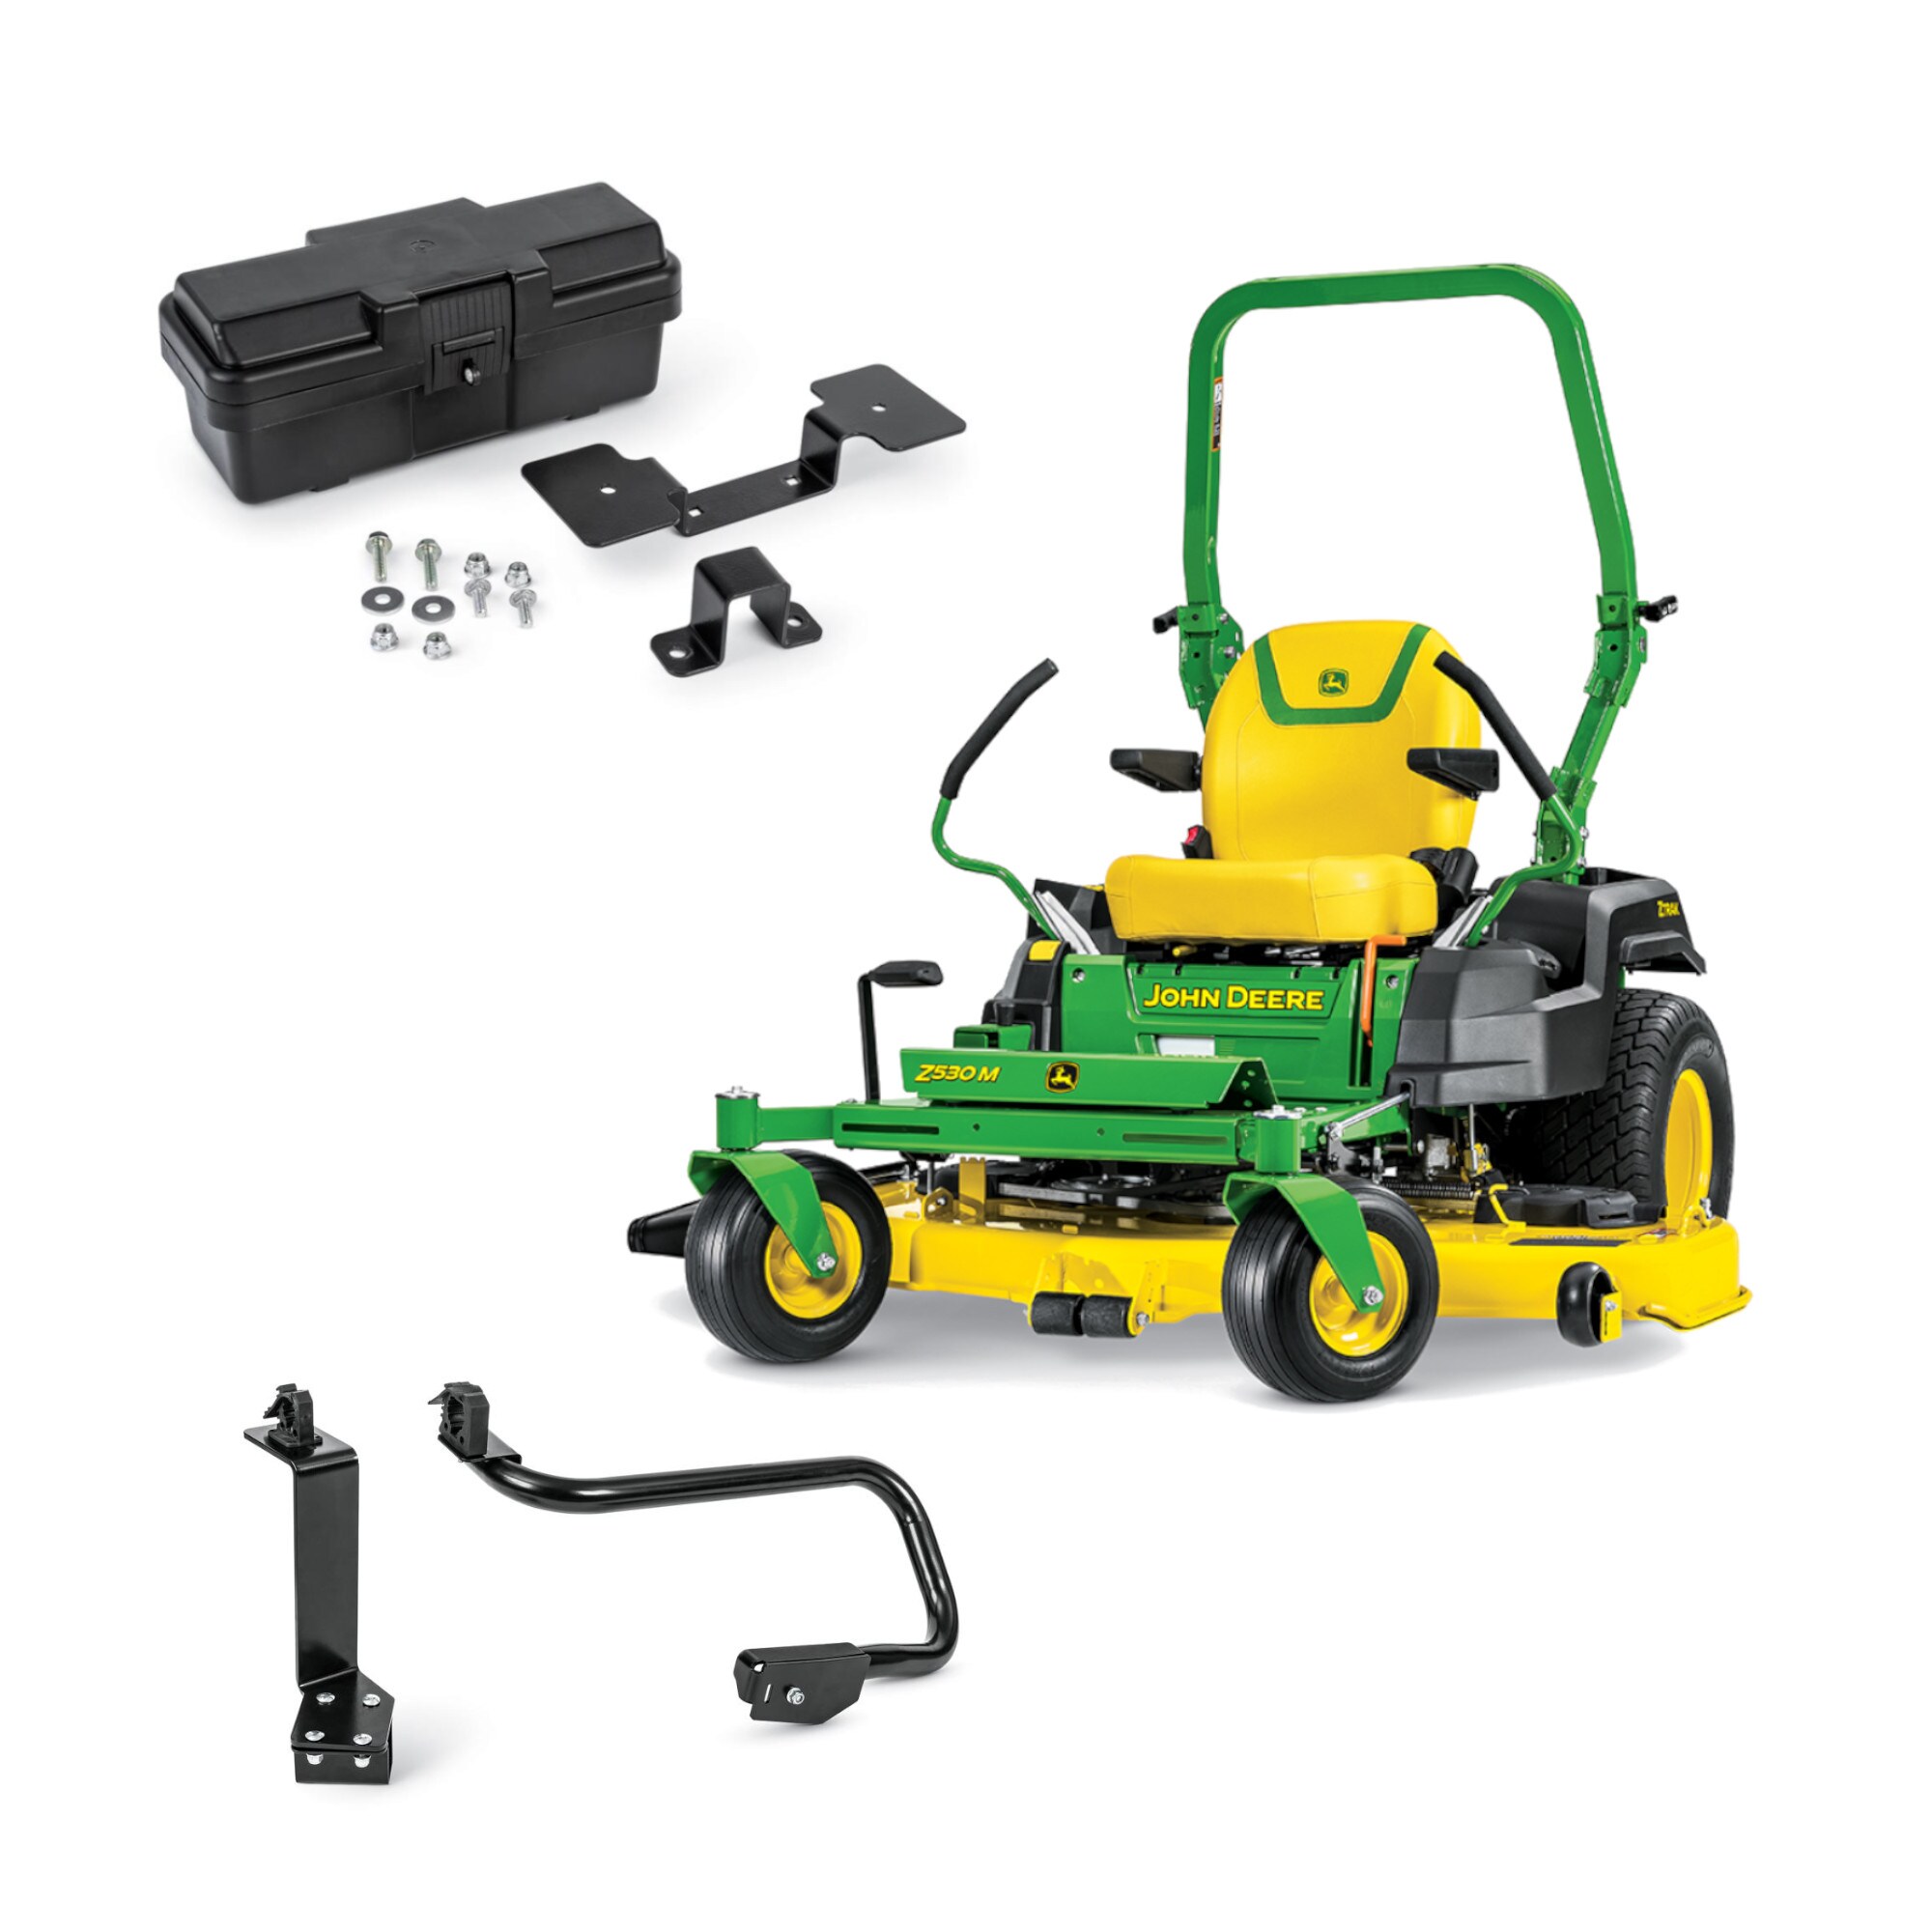 shop-john-deere-z530m-toolbox-collection-at-lowes